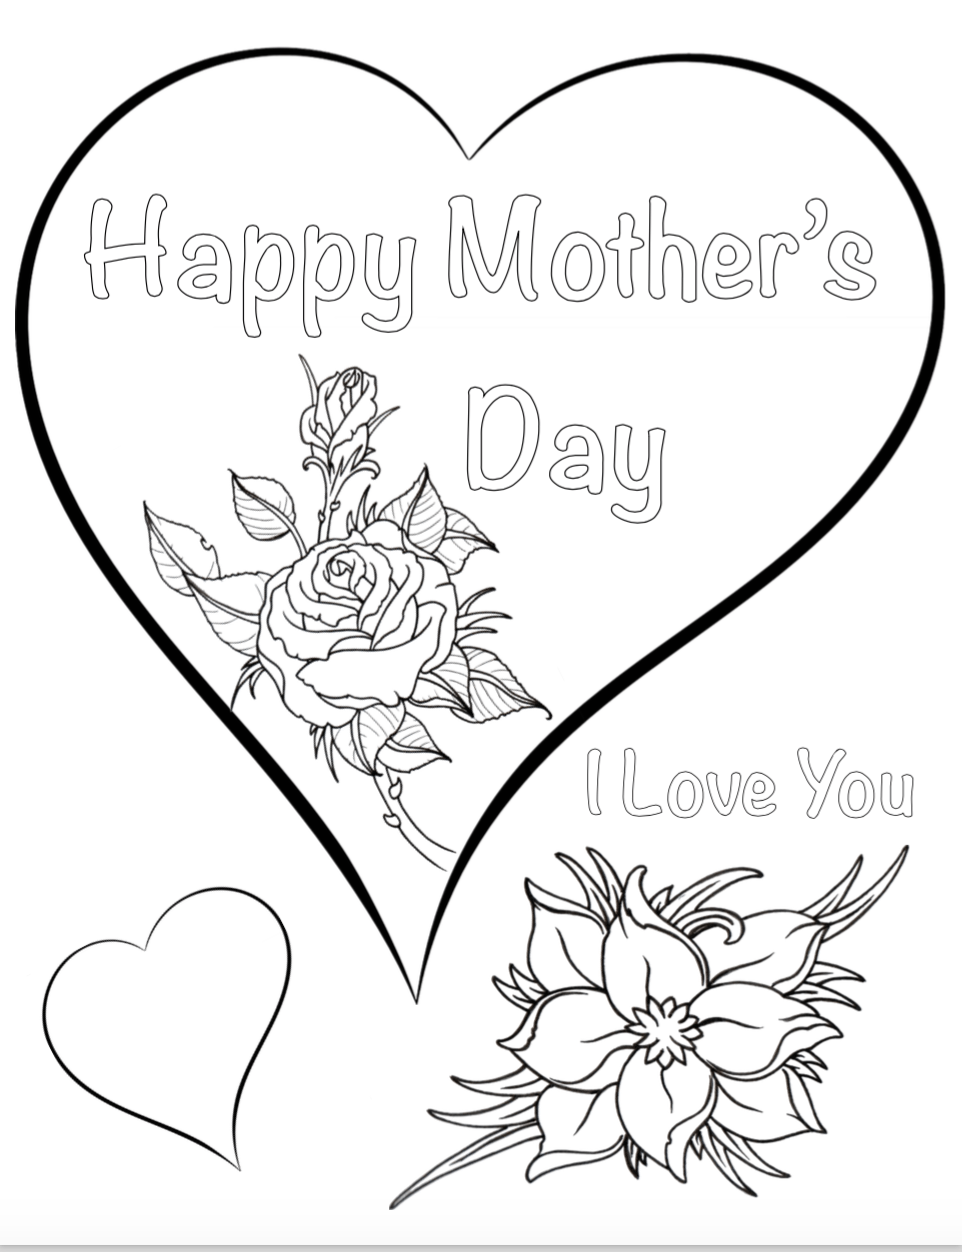 Free Printable Mother'S Day Coloring Pages: 4 Different Designs